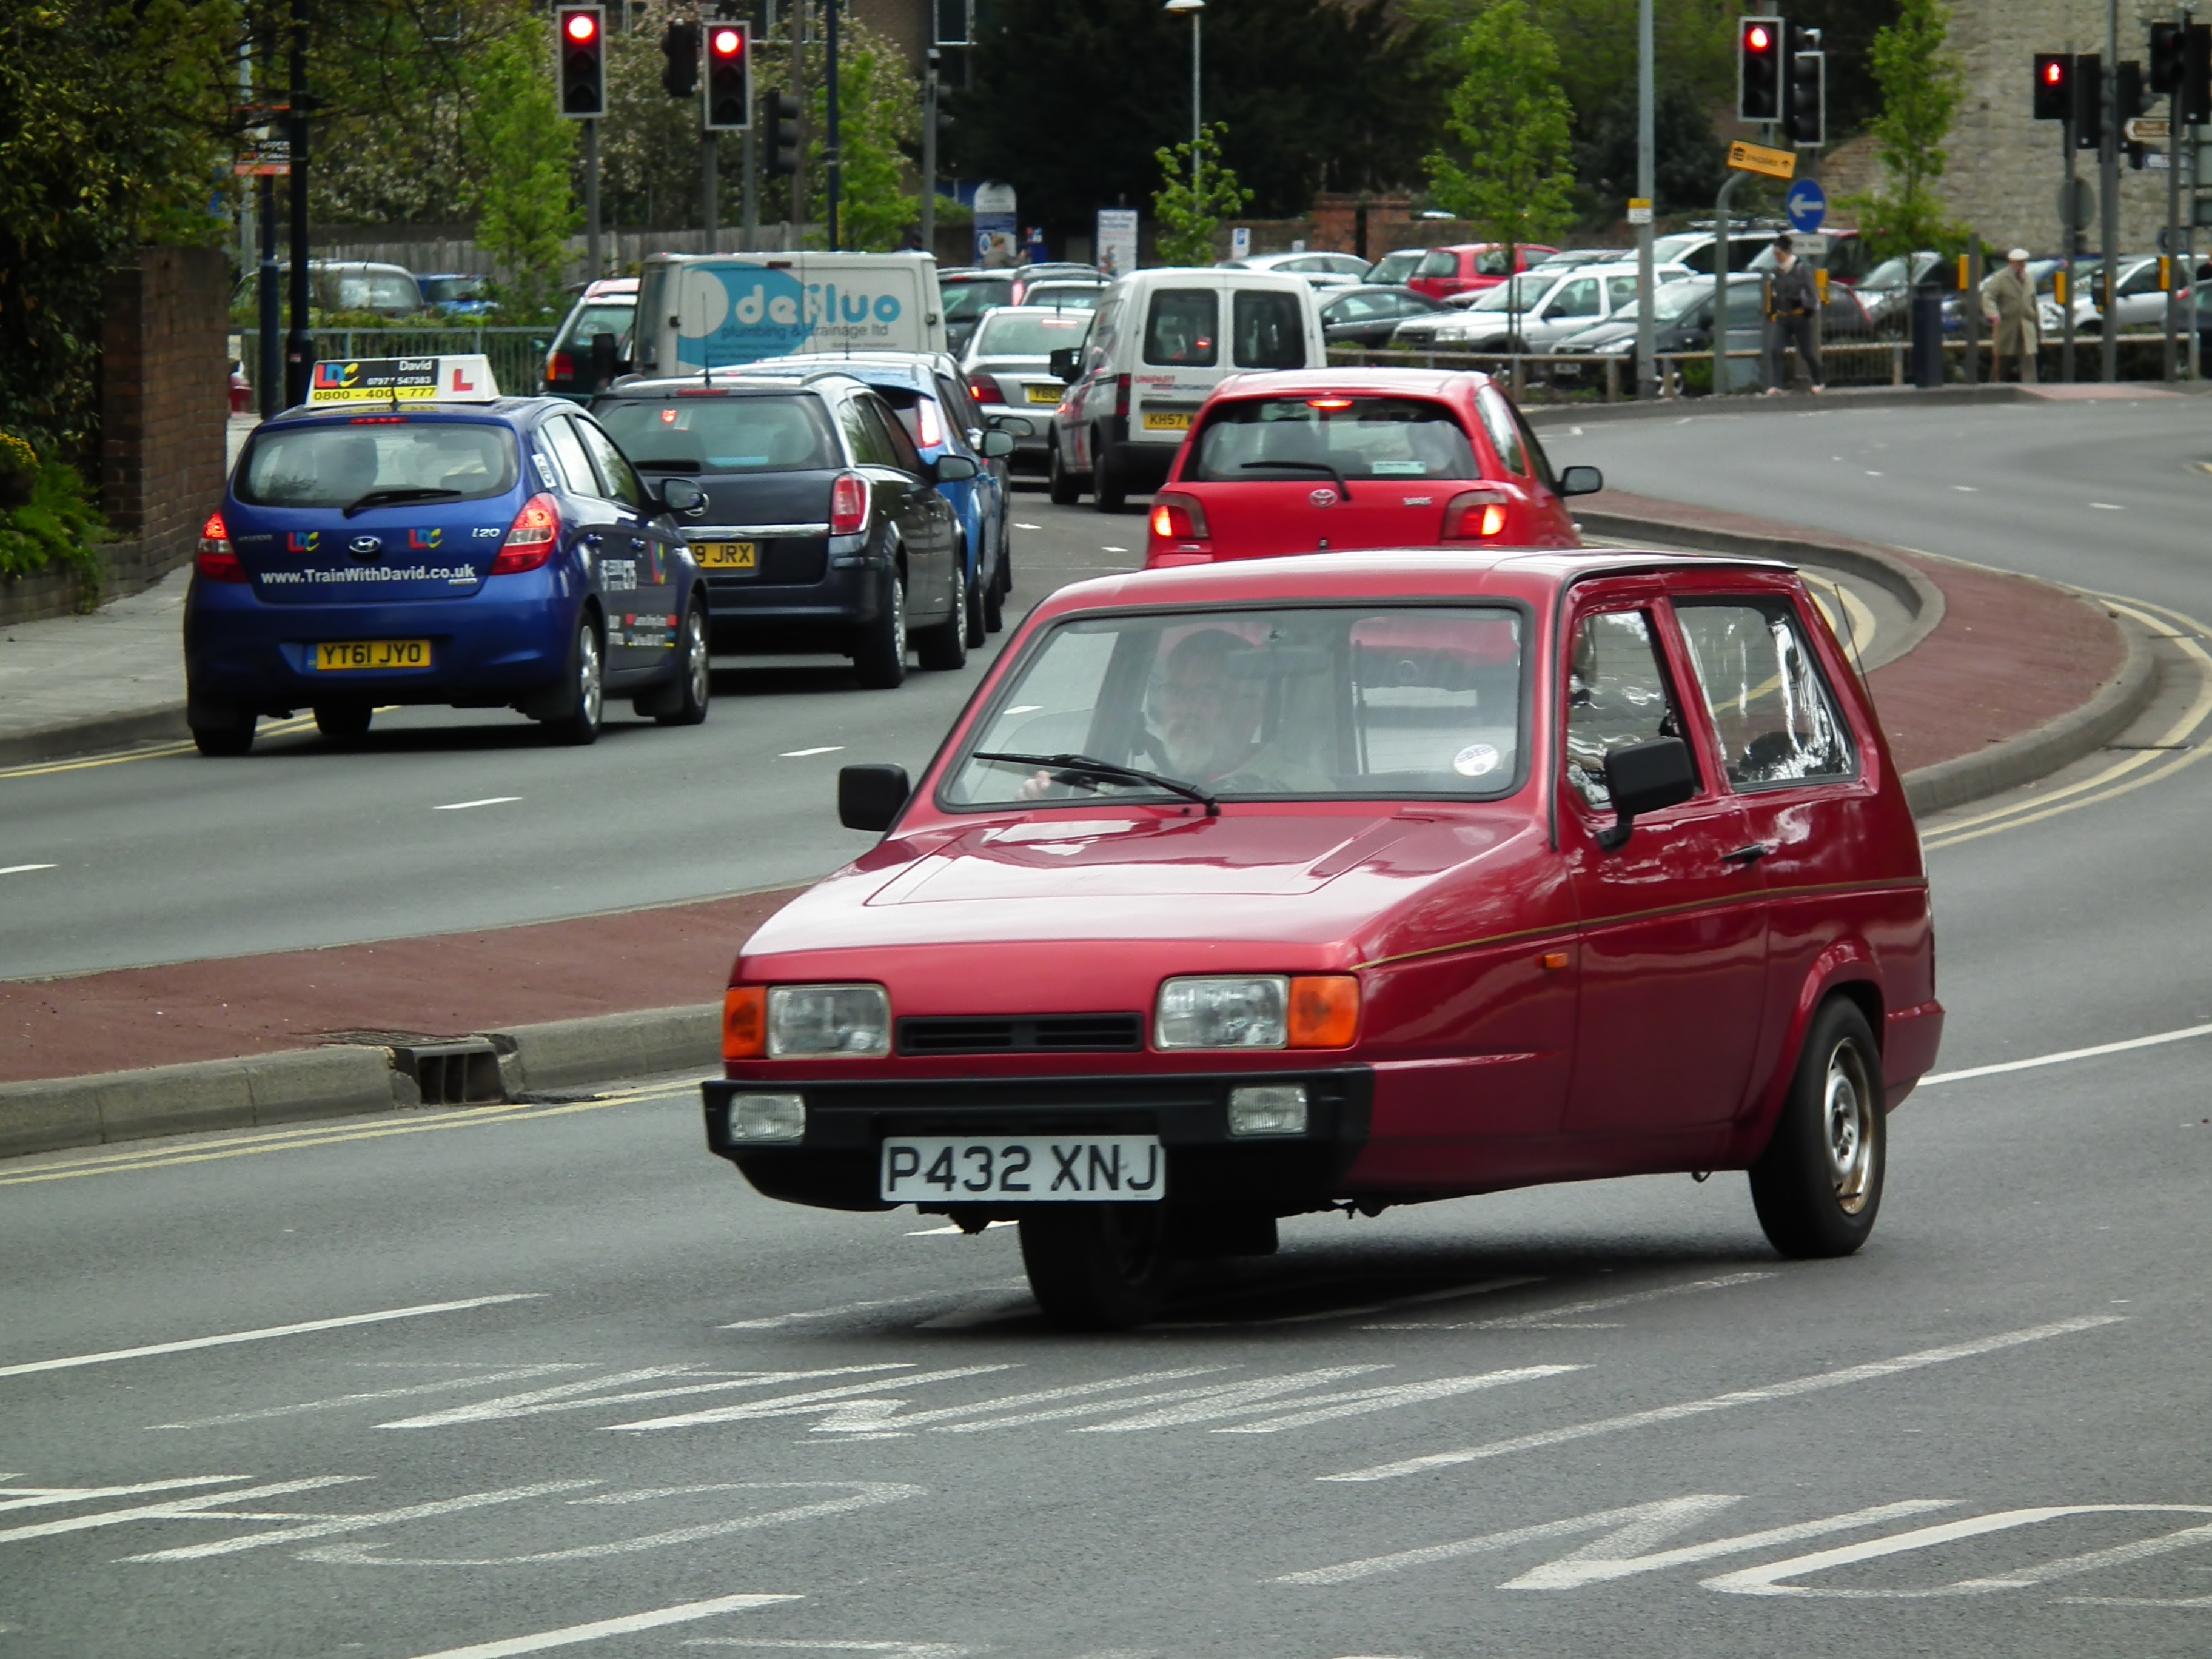 Reliant Robin Lx | Flickr - Photo Sharing!